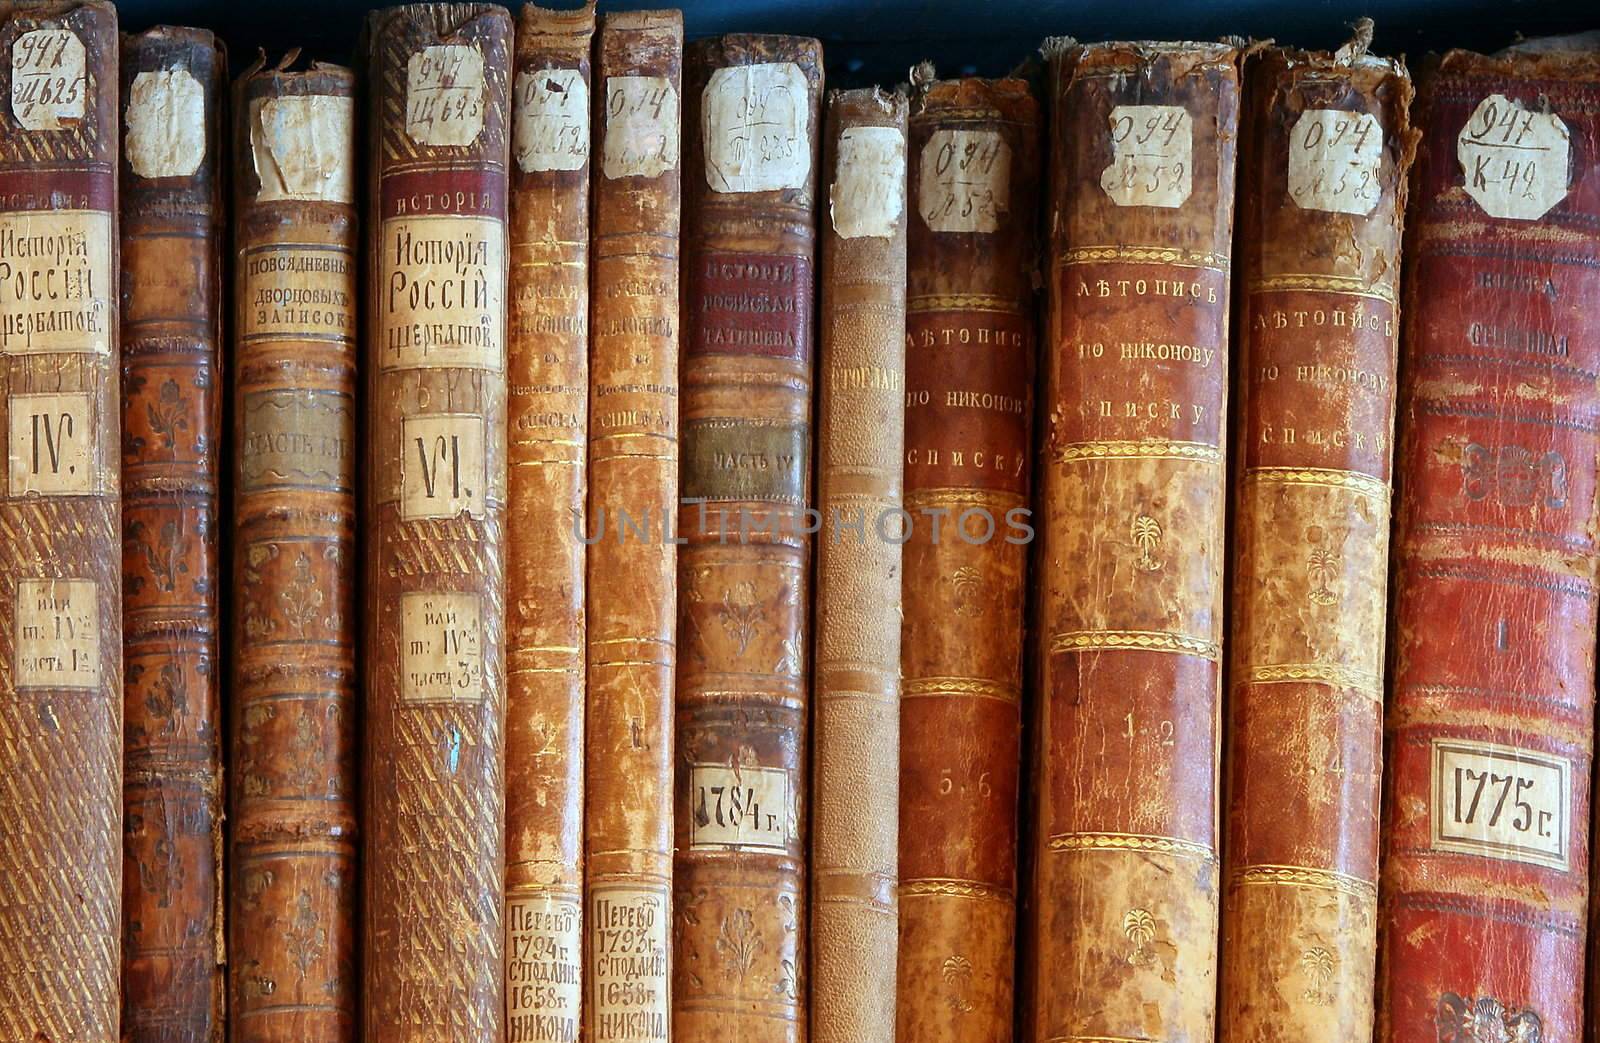 Row of old  books cover spines by fotosergio